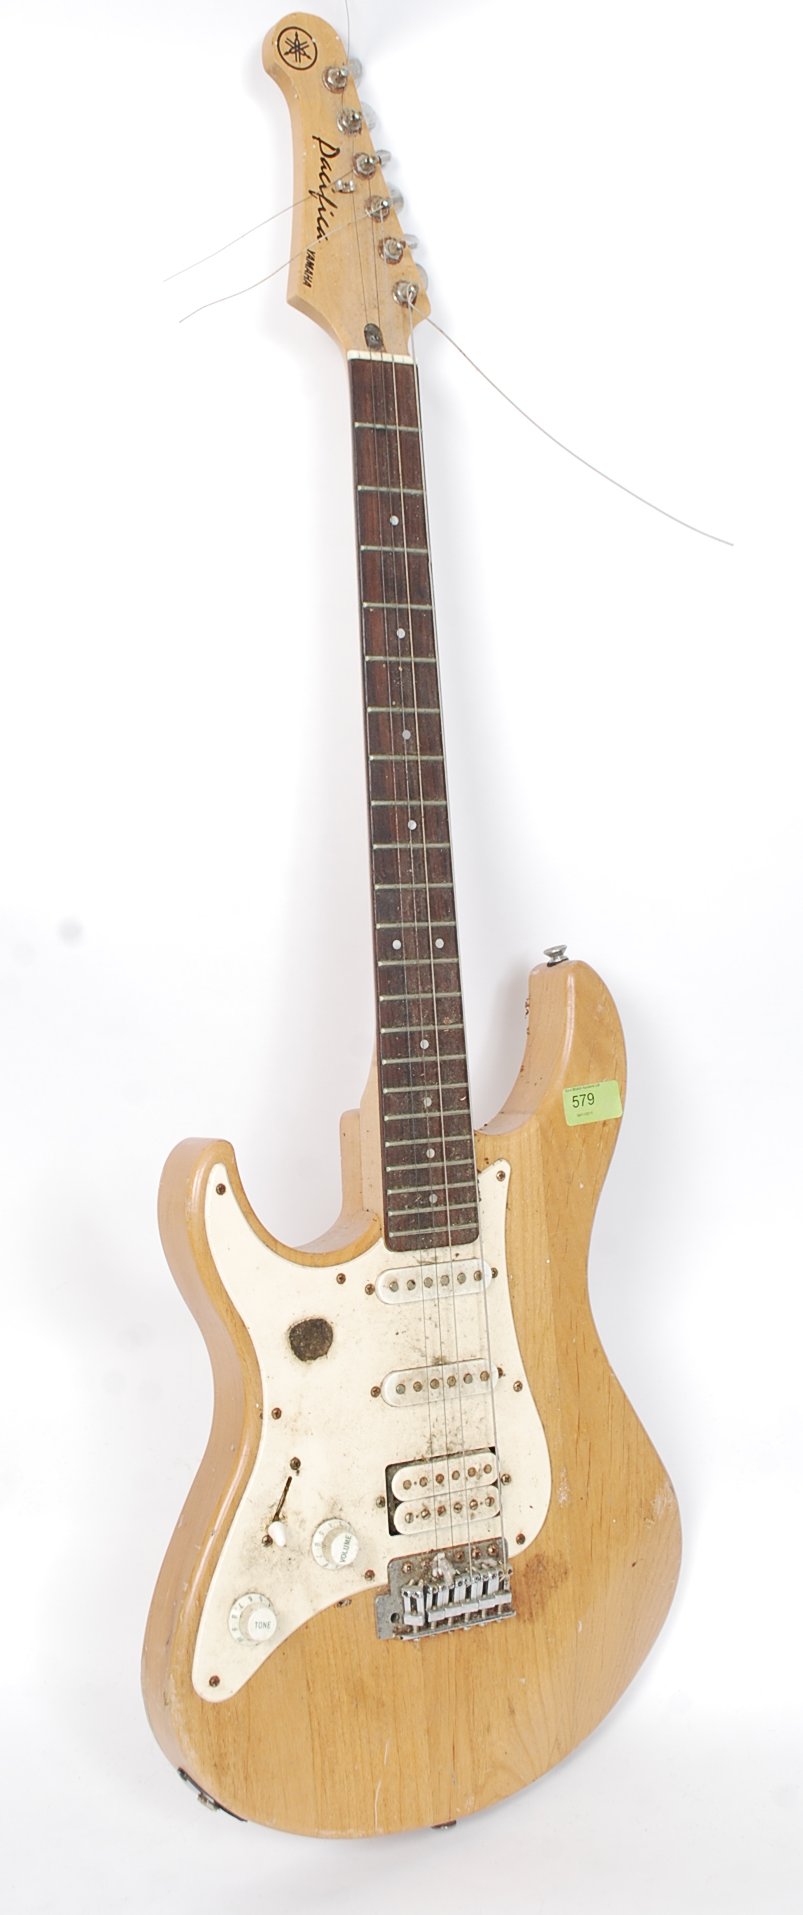 A left handed Yamaha electric ' Pacifier ' stratocaster shaped electric guitar.